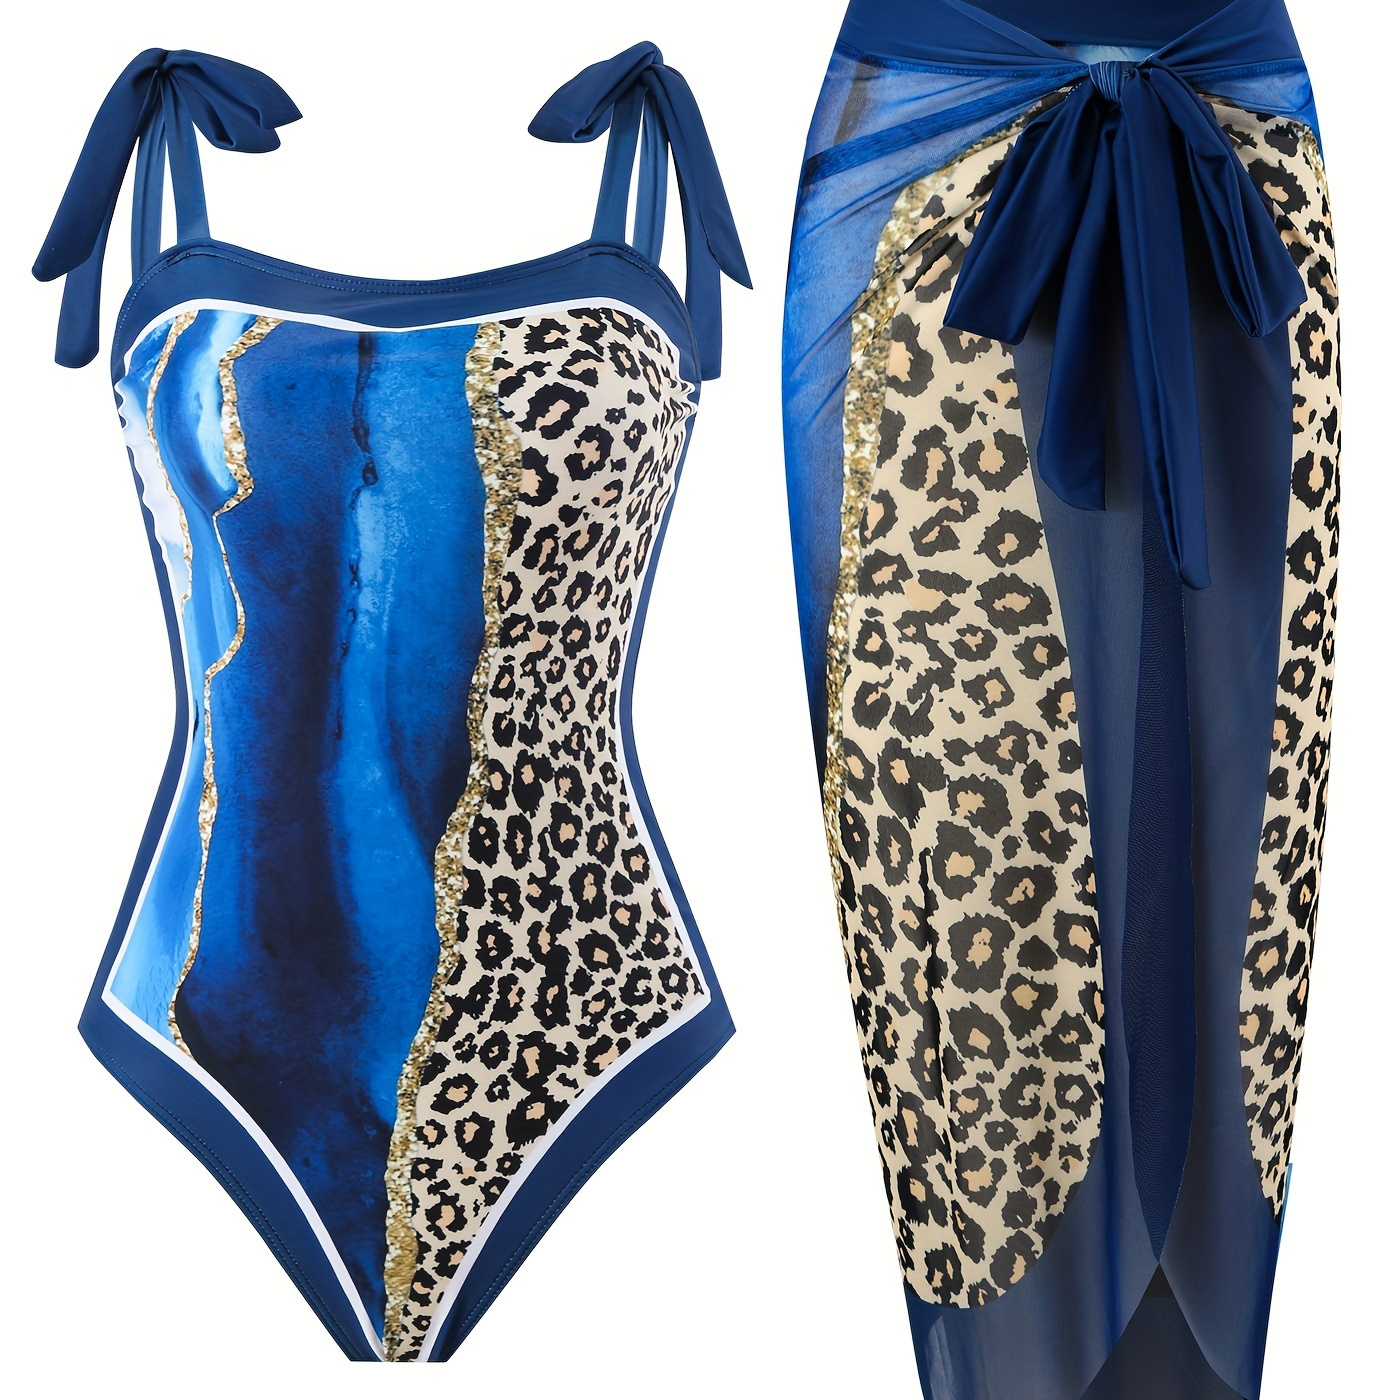 

Leopard Merble Print Blue 2 Piece Swimsuits, Tie Shoulder Elegant Stretchy One-piece Bathing-suit & Cover Up Skirt, Women's Swimwear & Clothing